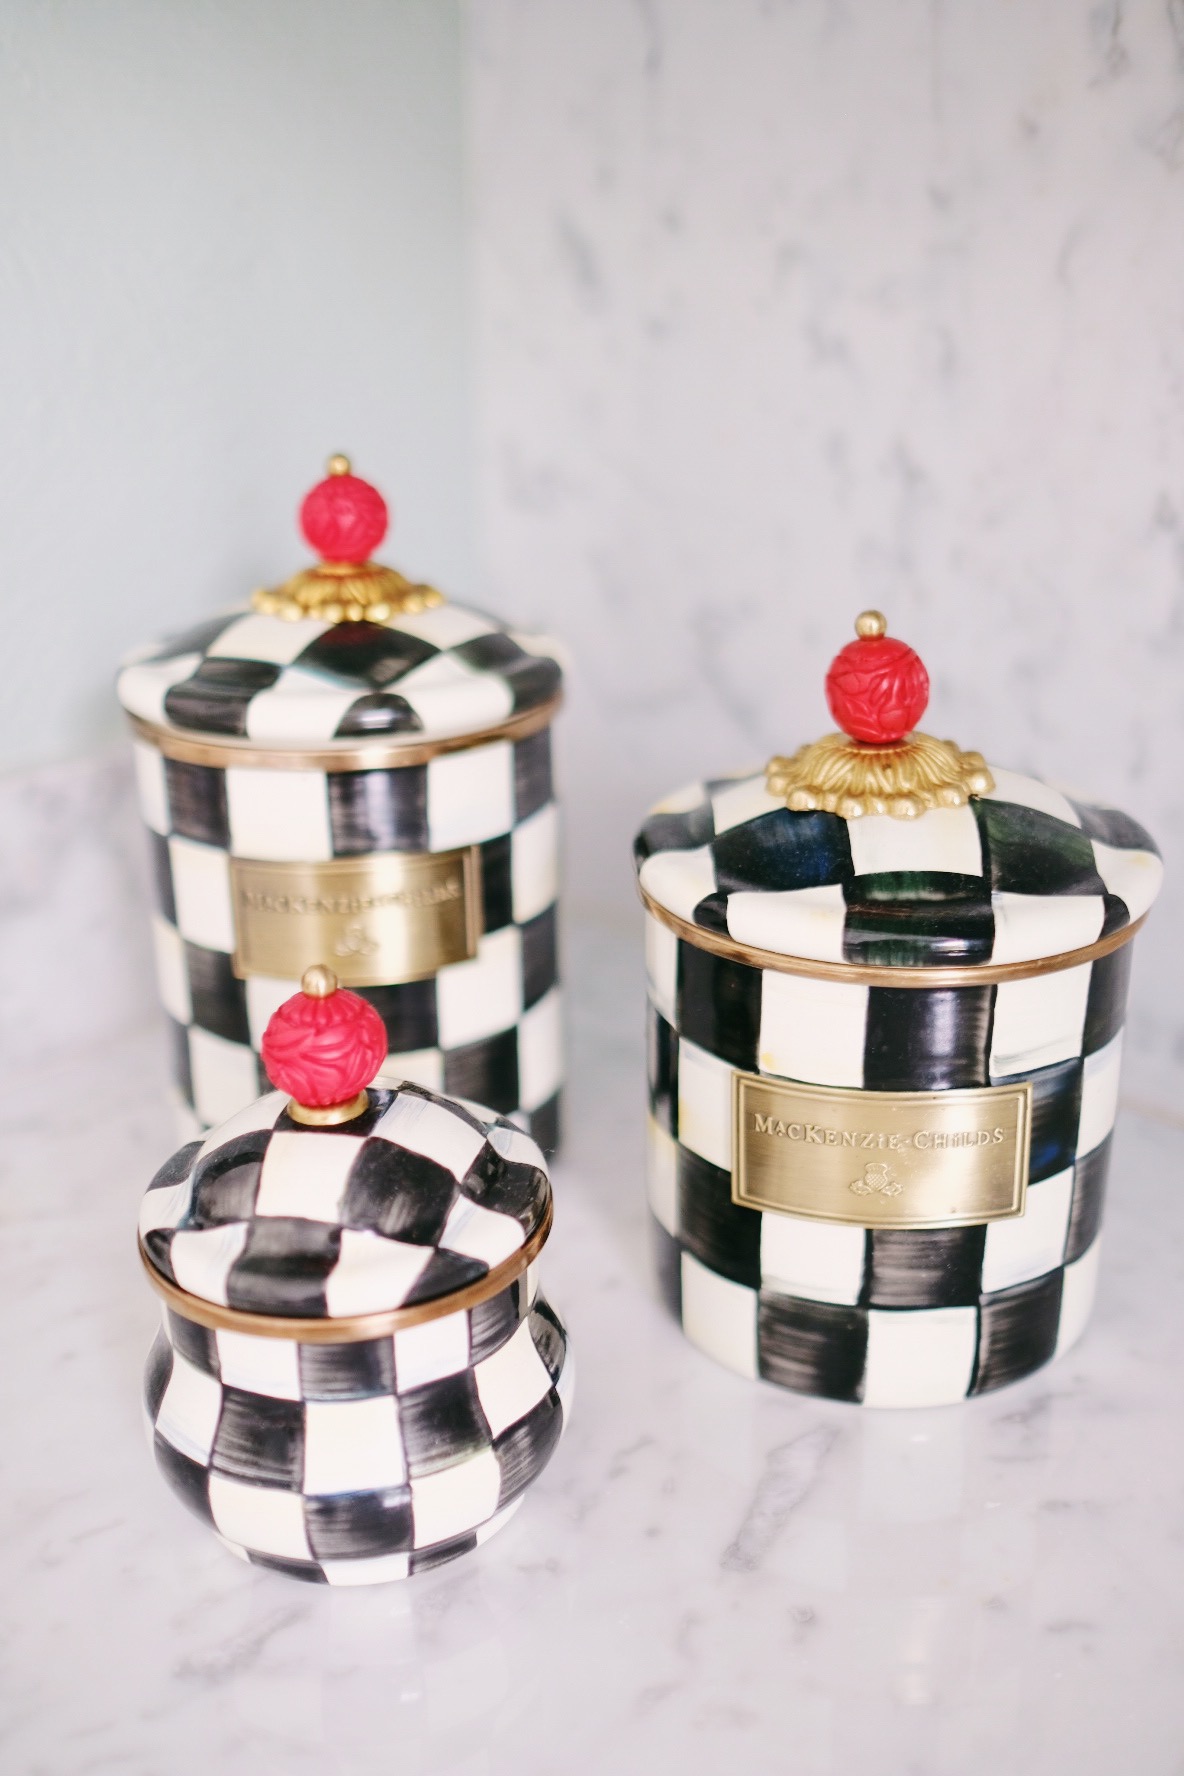 Mackenzie Childs canisters | Miss Madeline Rose